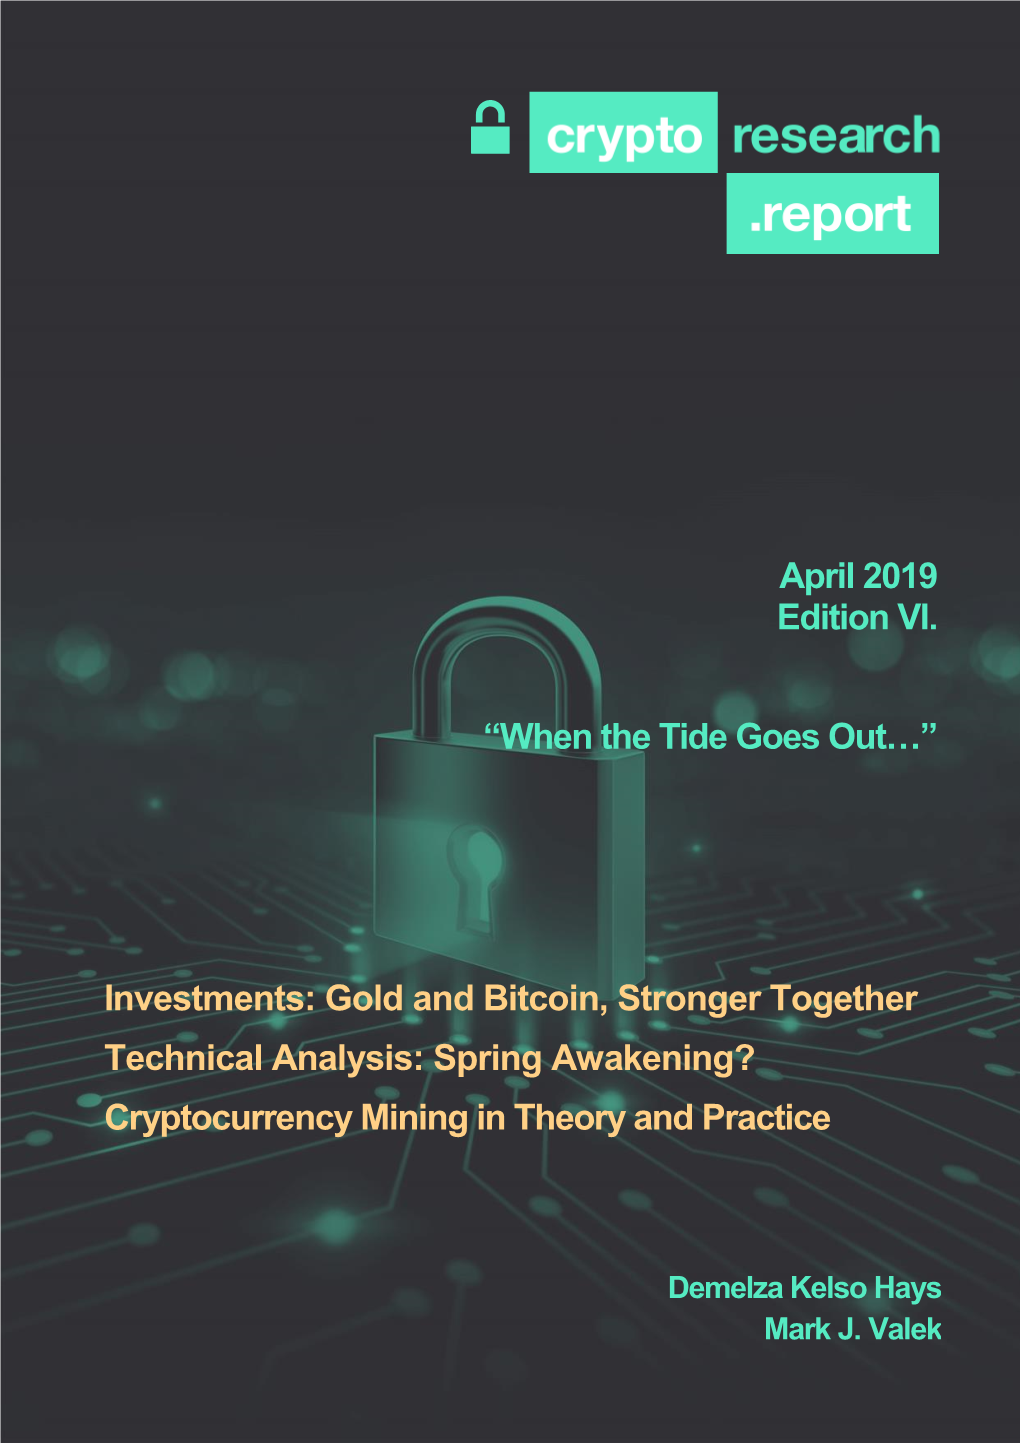 Crypto Research Report ‒ April 2019 Edition